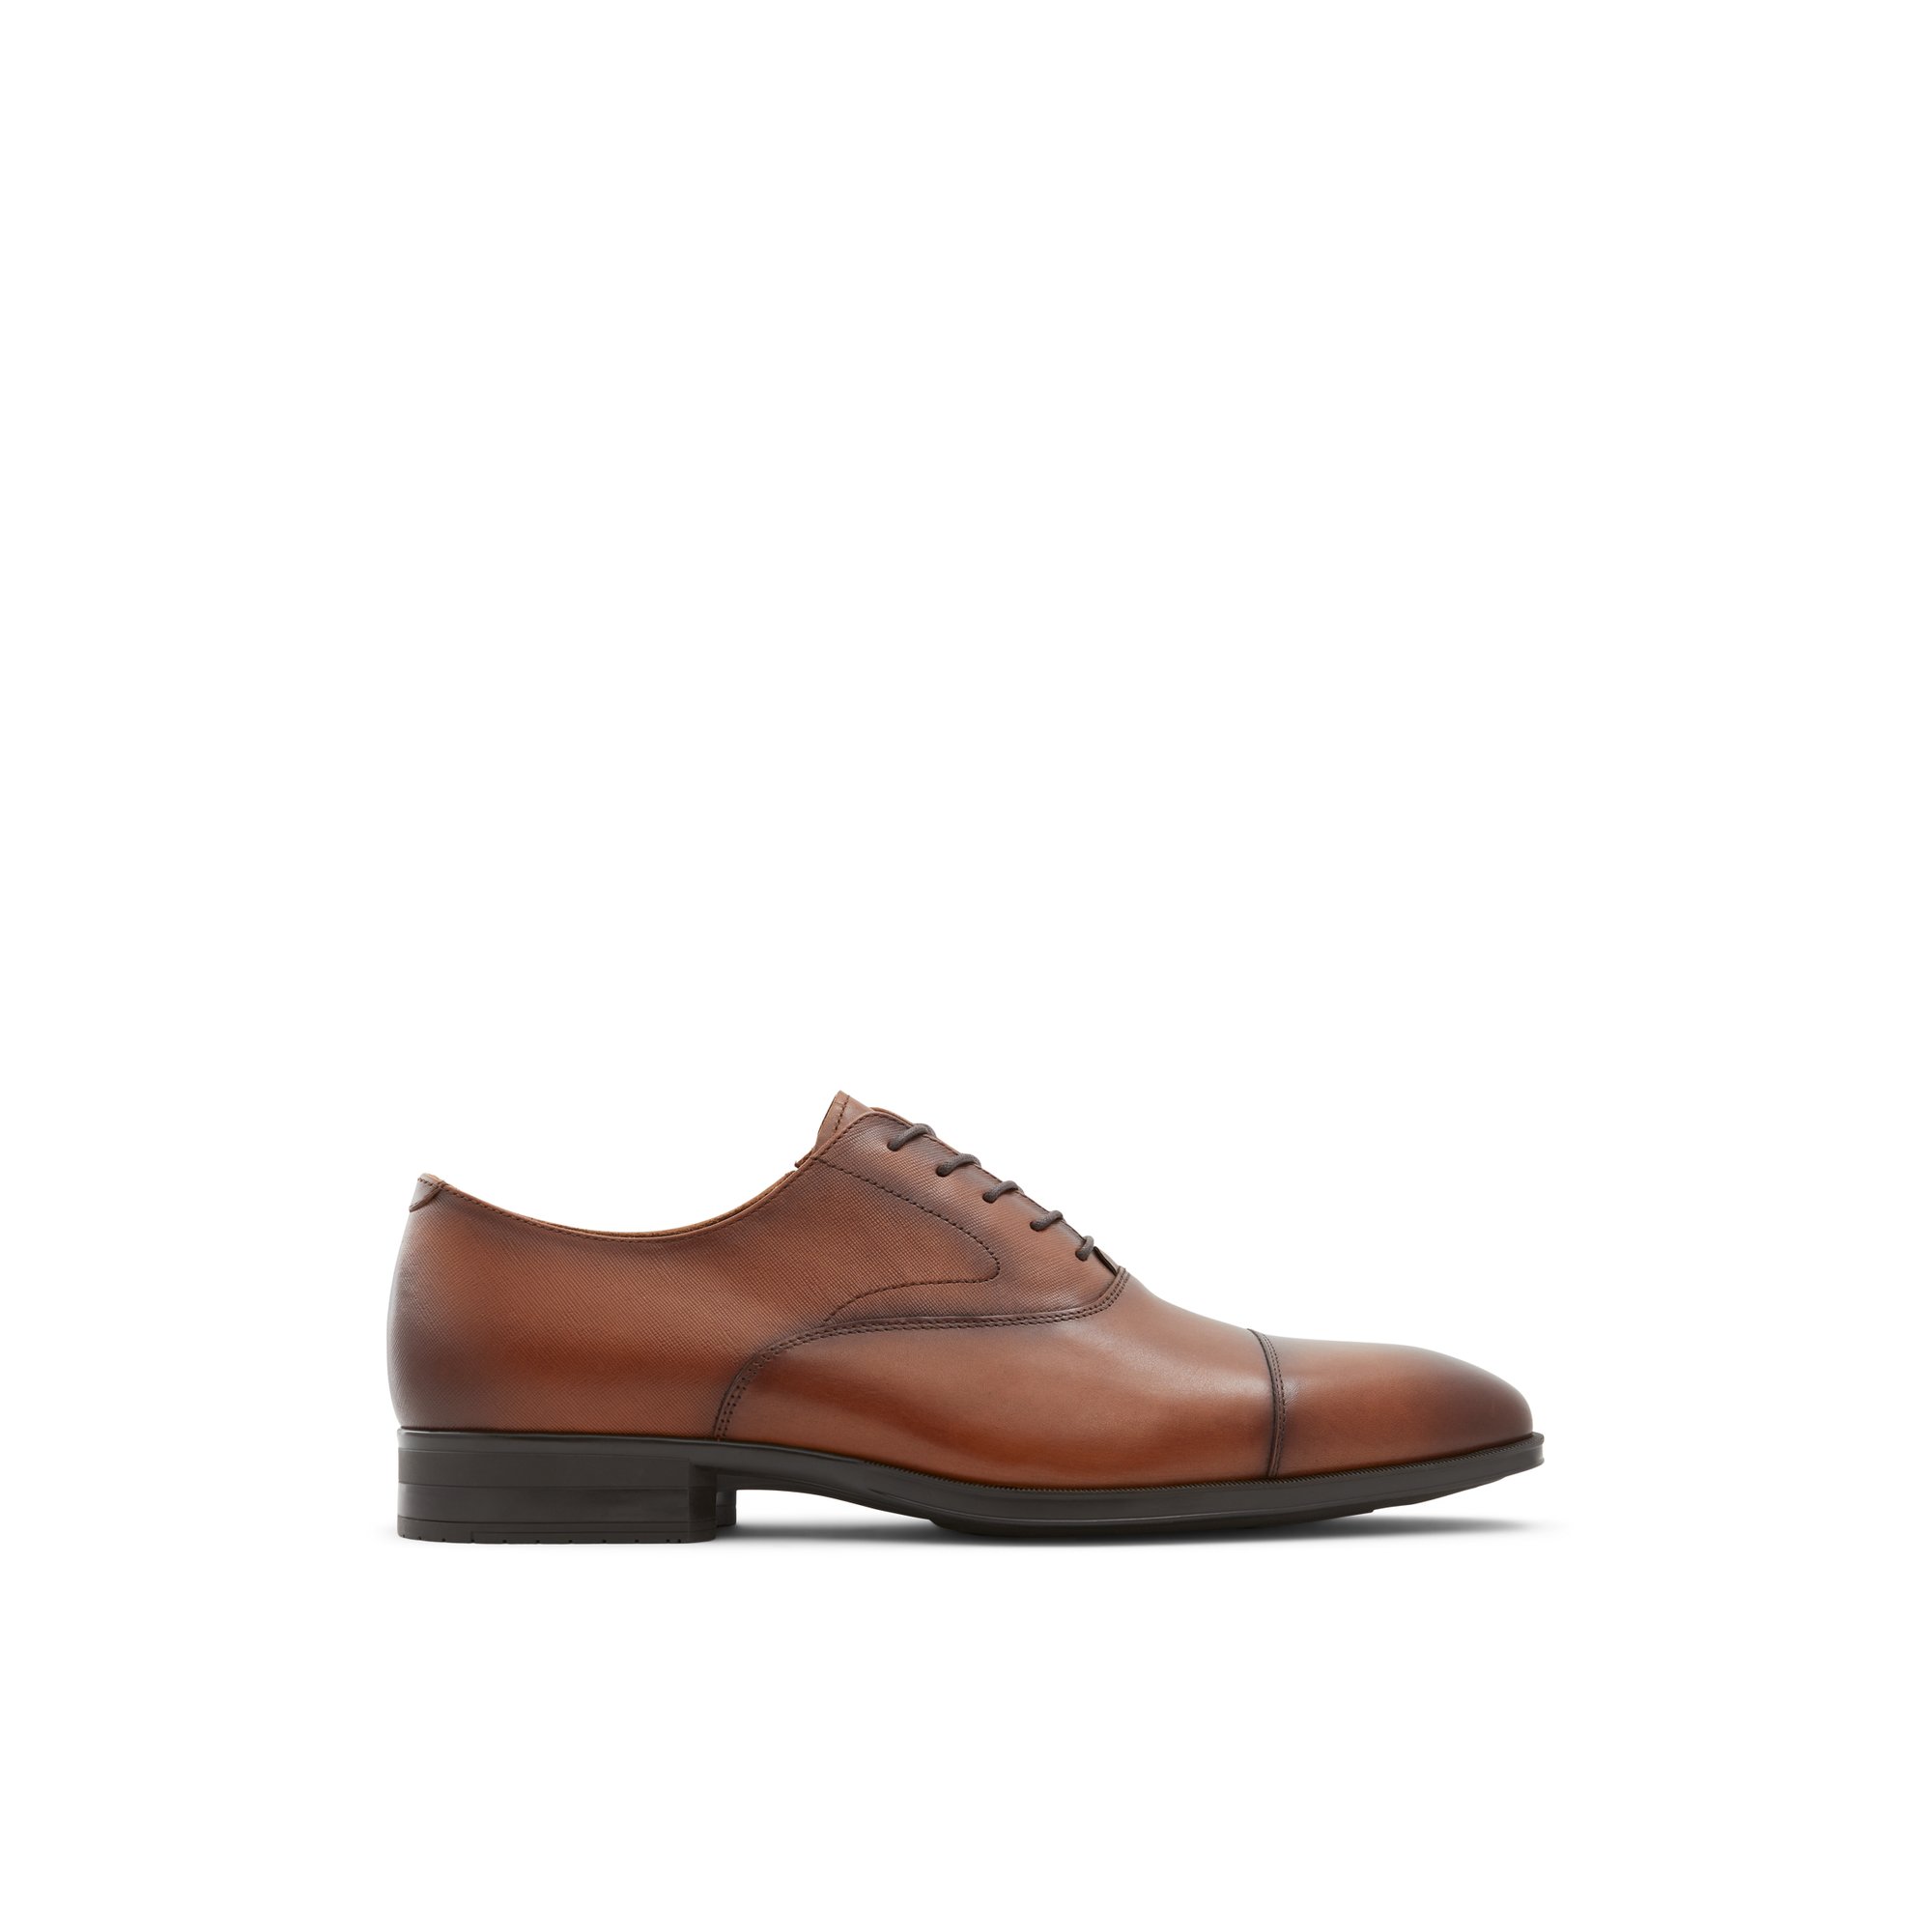 ALDO Miraylle - Men's Oxfords and Lace Ups - Brown